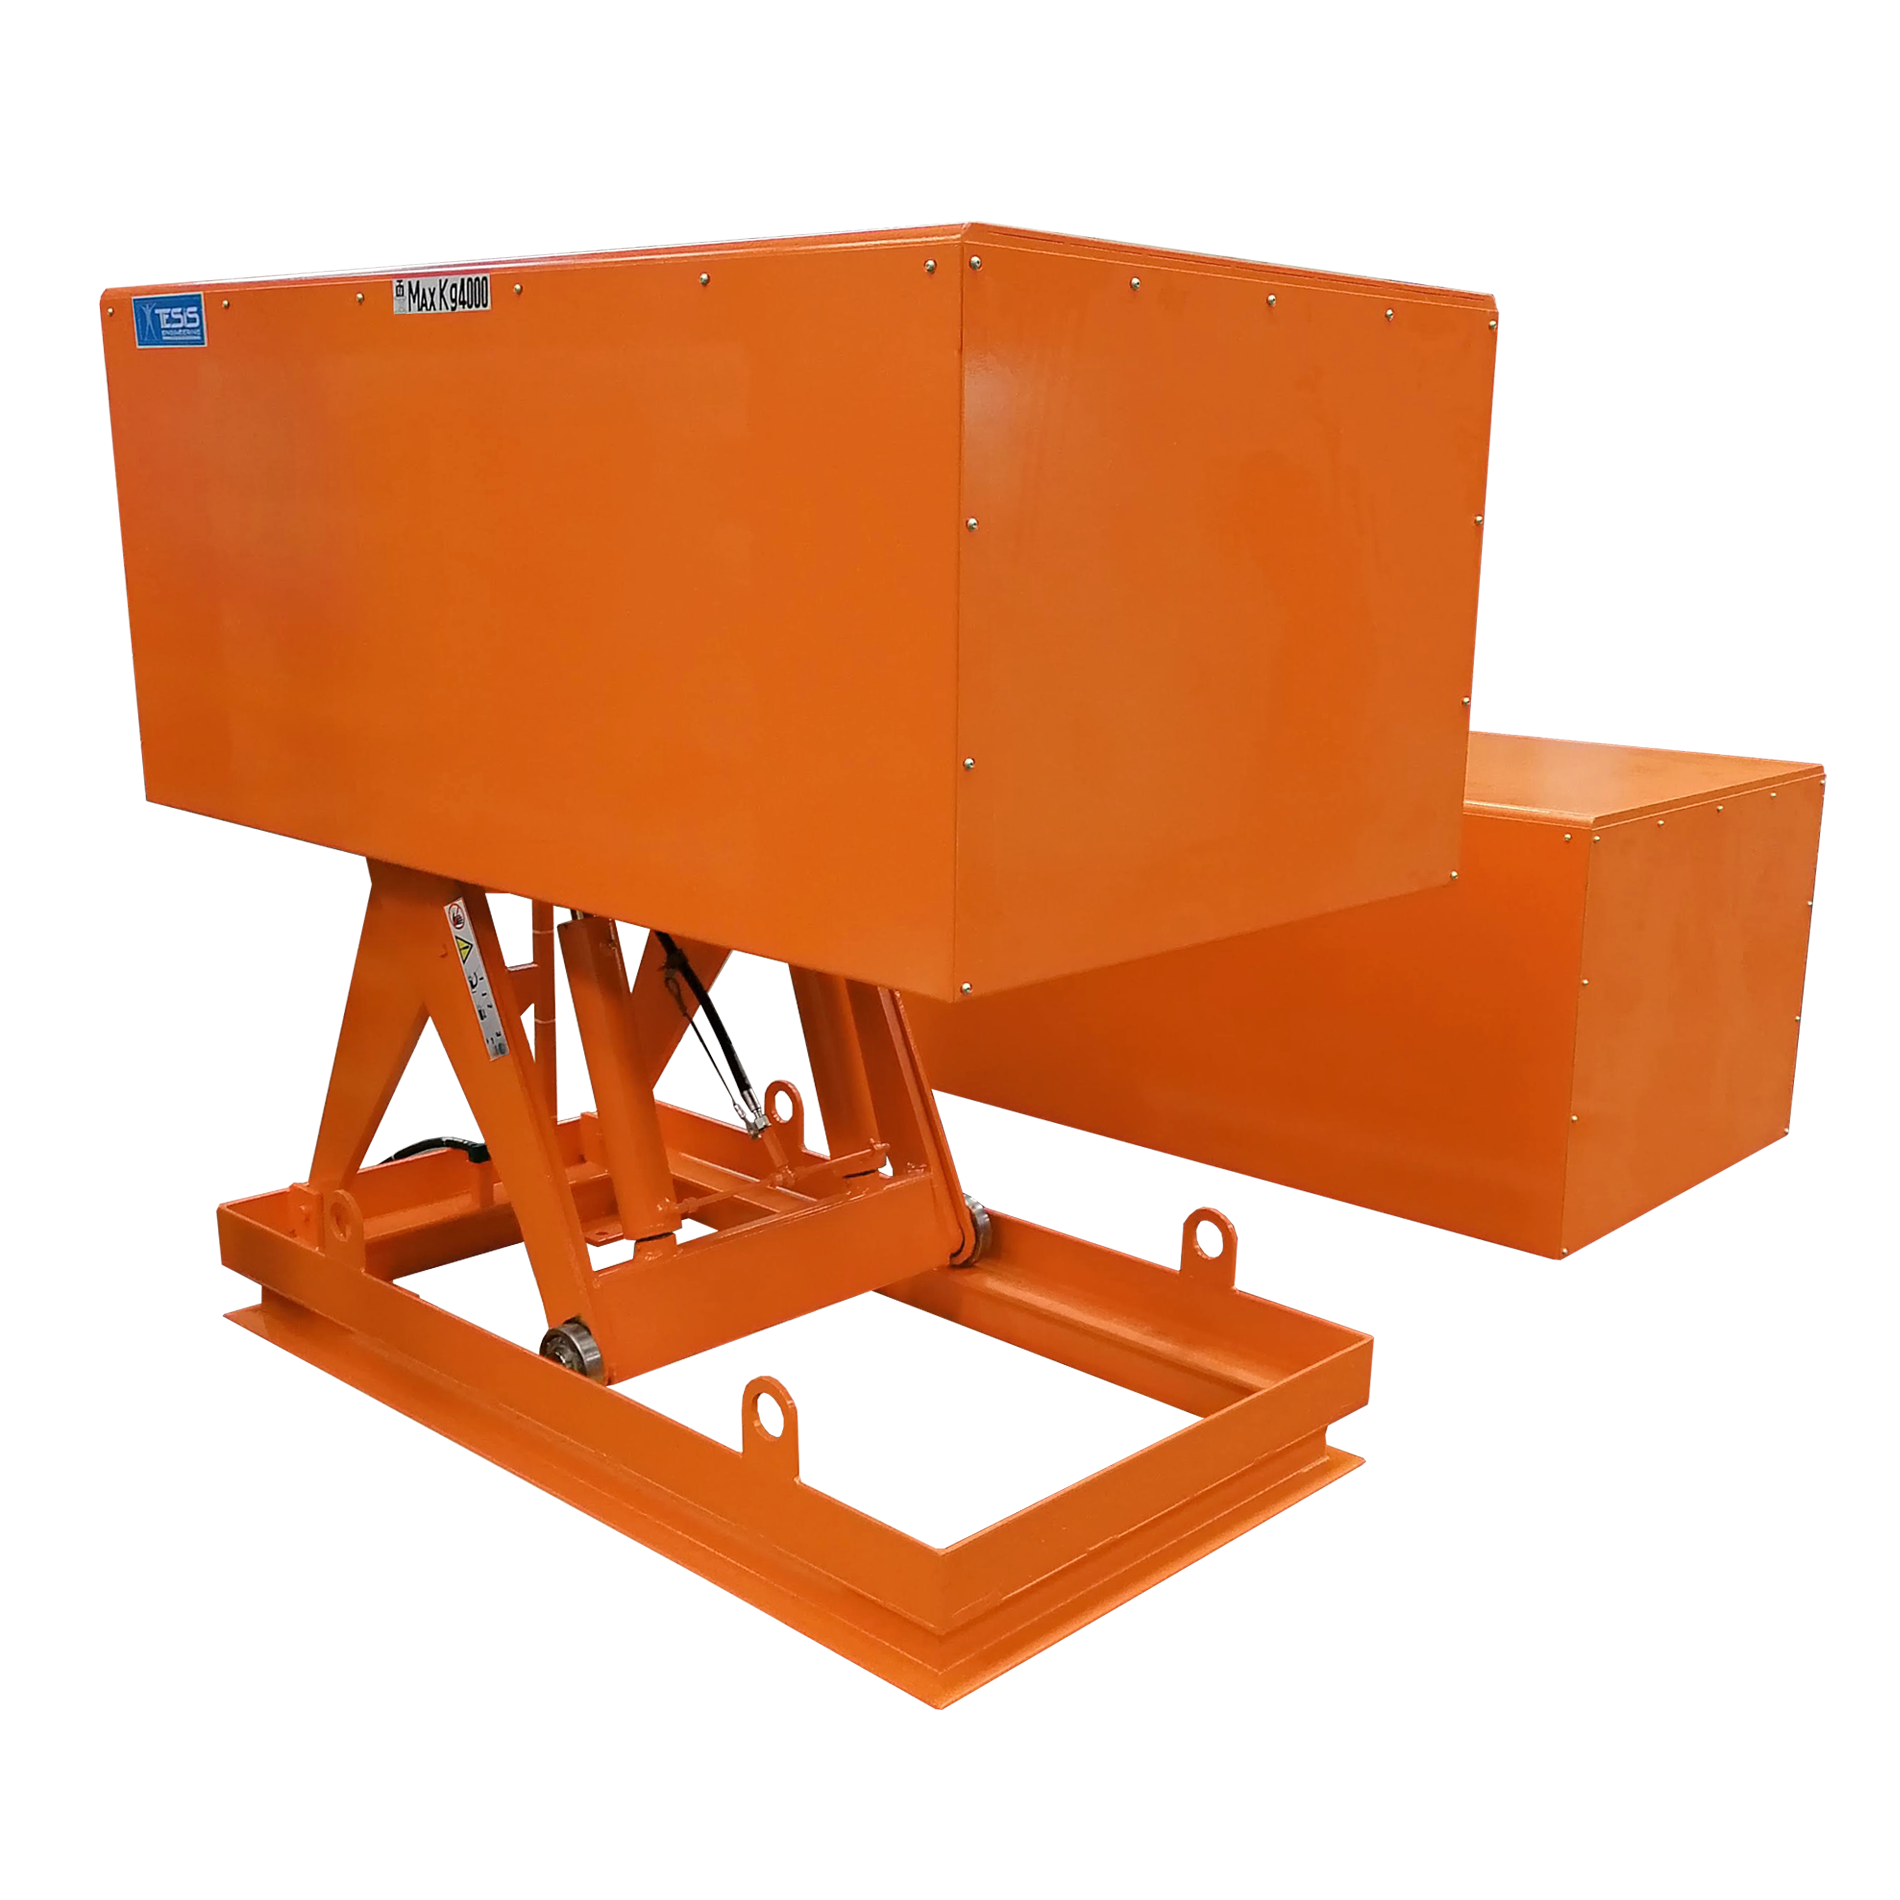 Lifting platform with fixed bulkheads to protect the housing pit - pit mounted lift tables - machinery feeding platform lifts